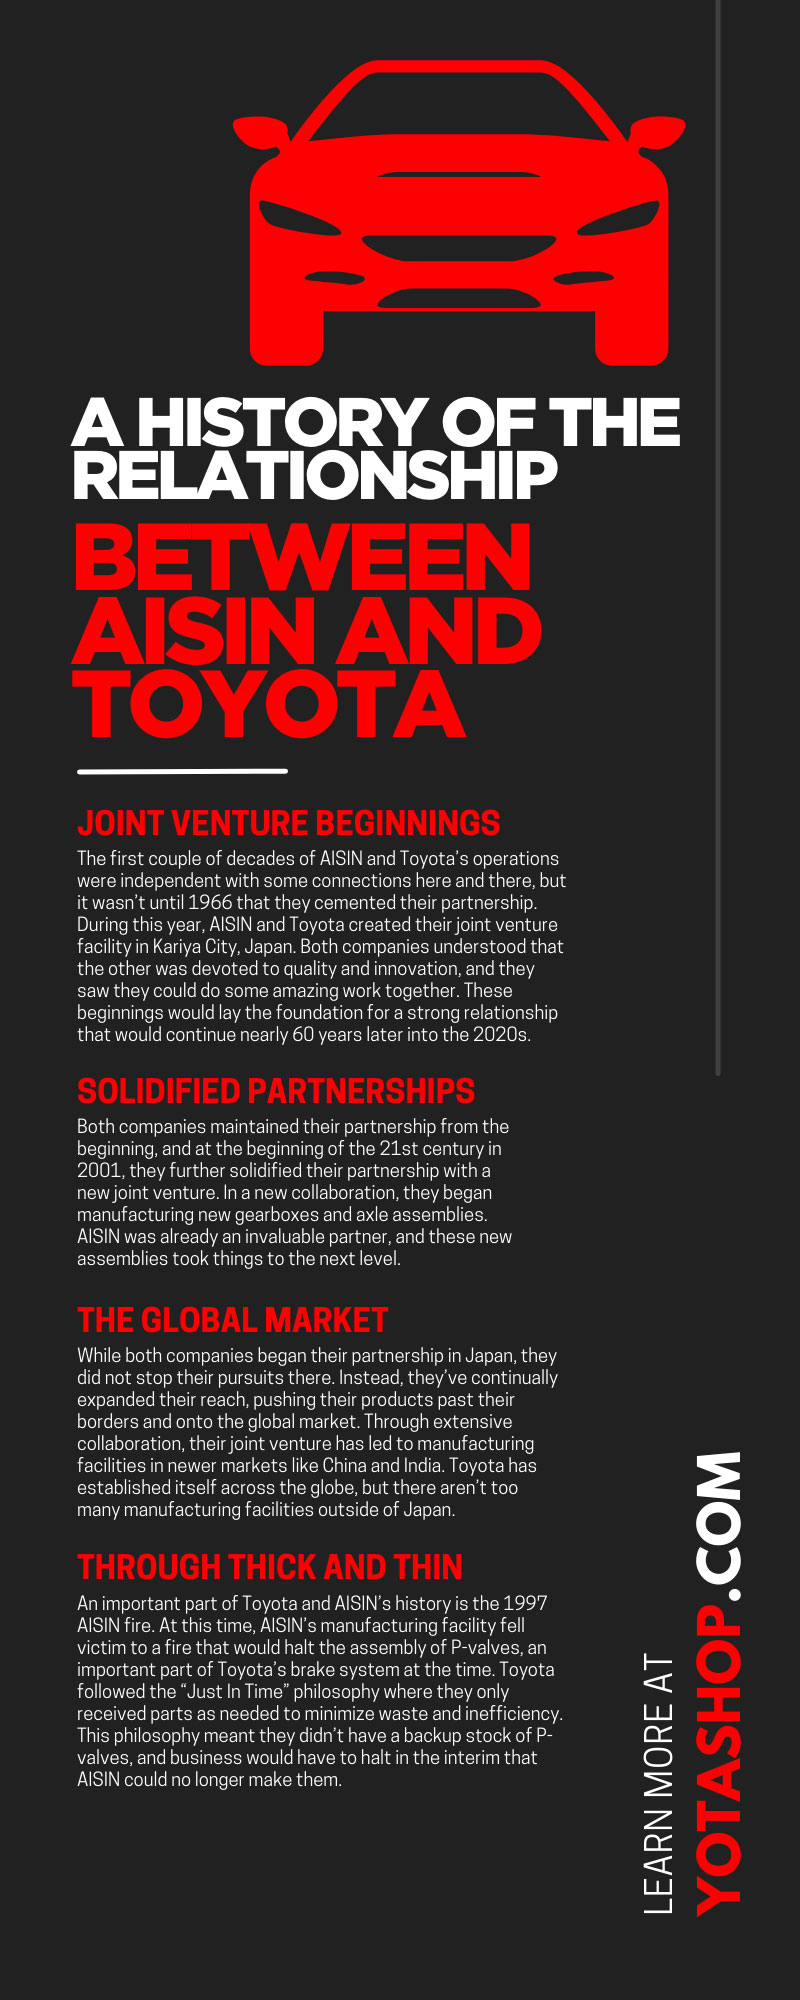 A History of the Relationship Between AISIN and Toyota